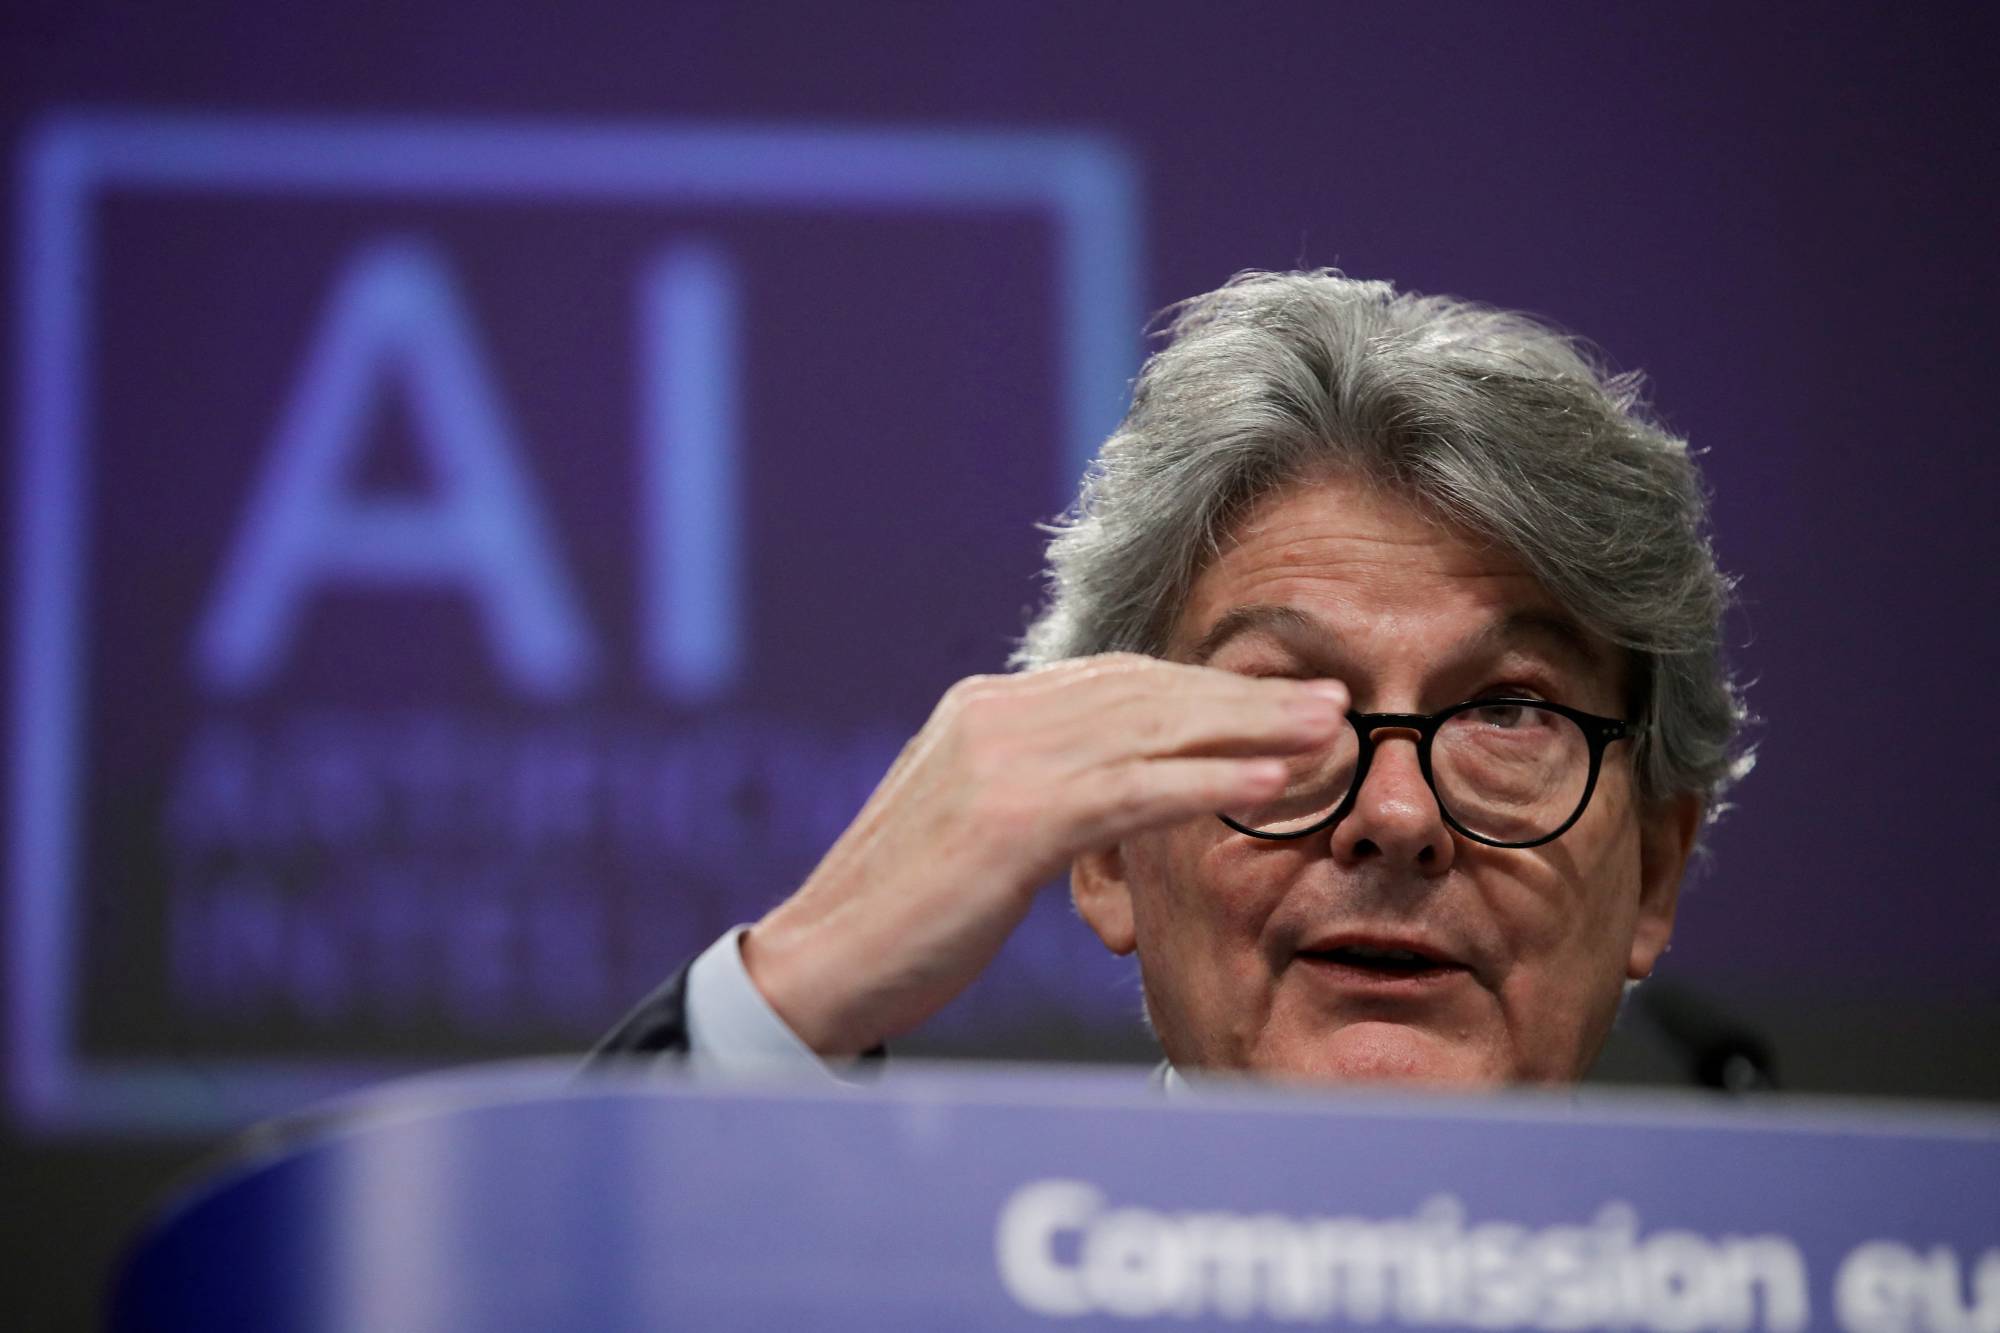 European Internal Market Commissioner Thierry Breton speaks at a media conference on the EU approach to Artificial Intelligence following a weekly meeting of the EU Commission in Brussels in April 2021. | REUTERS